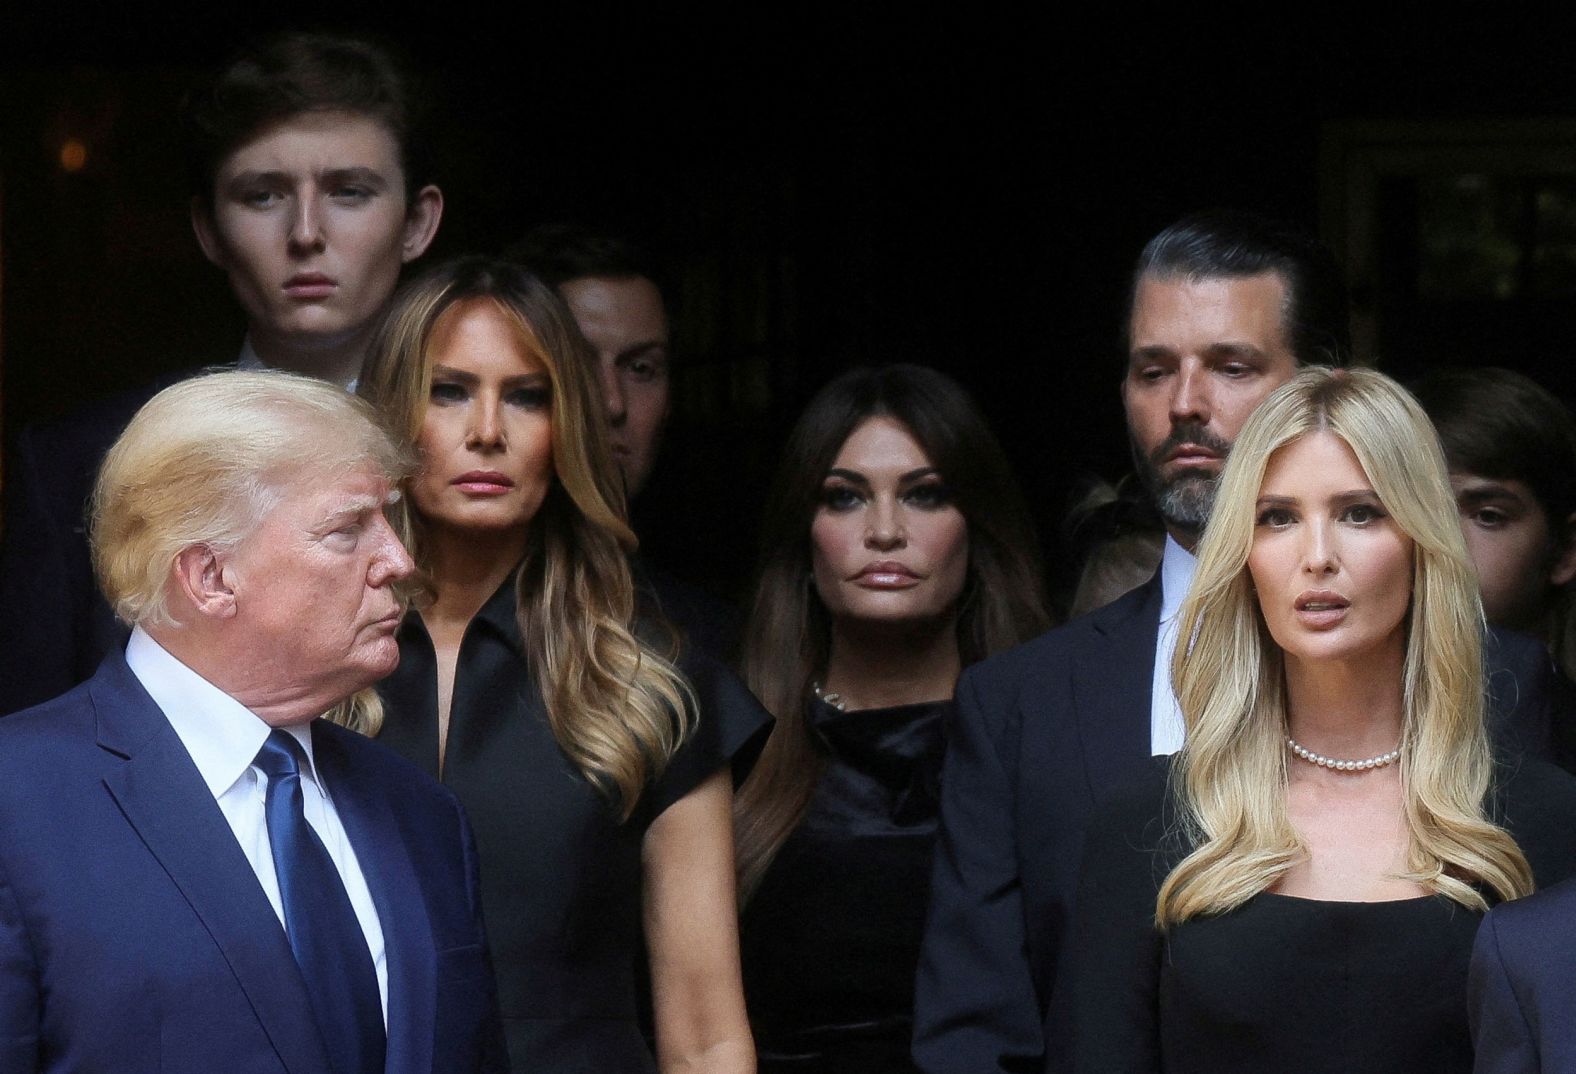 Trump is seen with former first lady Melania Trump and several other family members as they attend <a href="https://www.cnn.com/2022/07/20/politics/ivana-trump-funeral/index.html" target="_blank">the funeral of his first wife, Ivana,</a> in New York in July 2022.